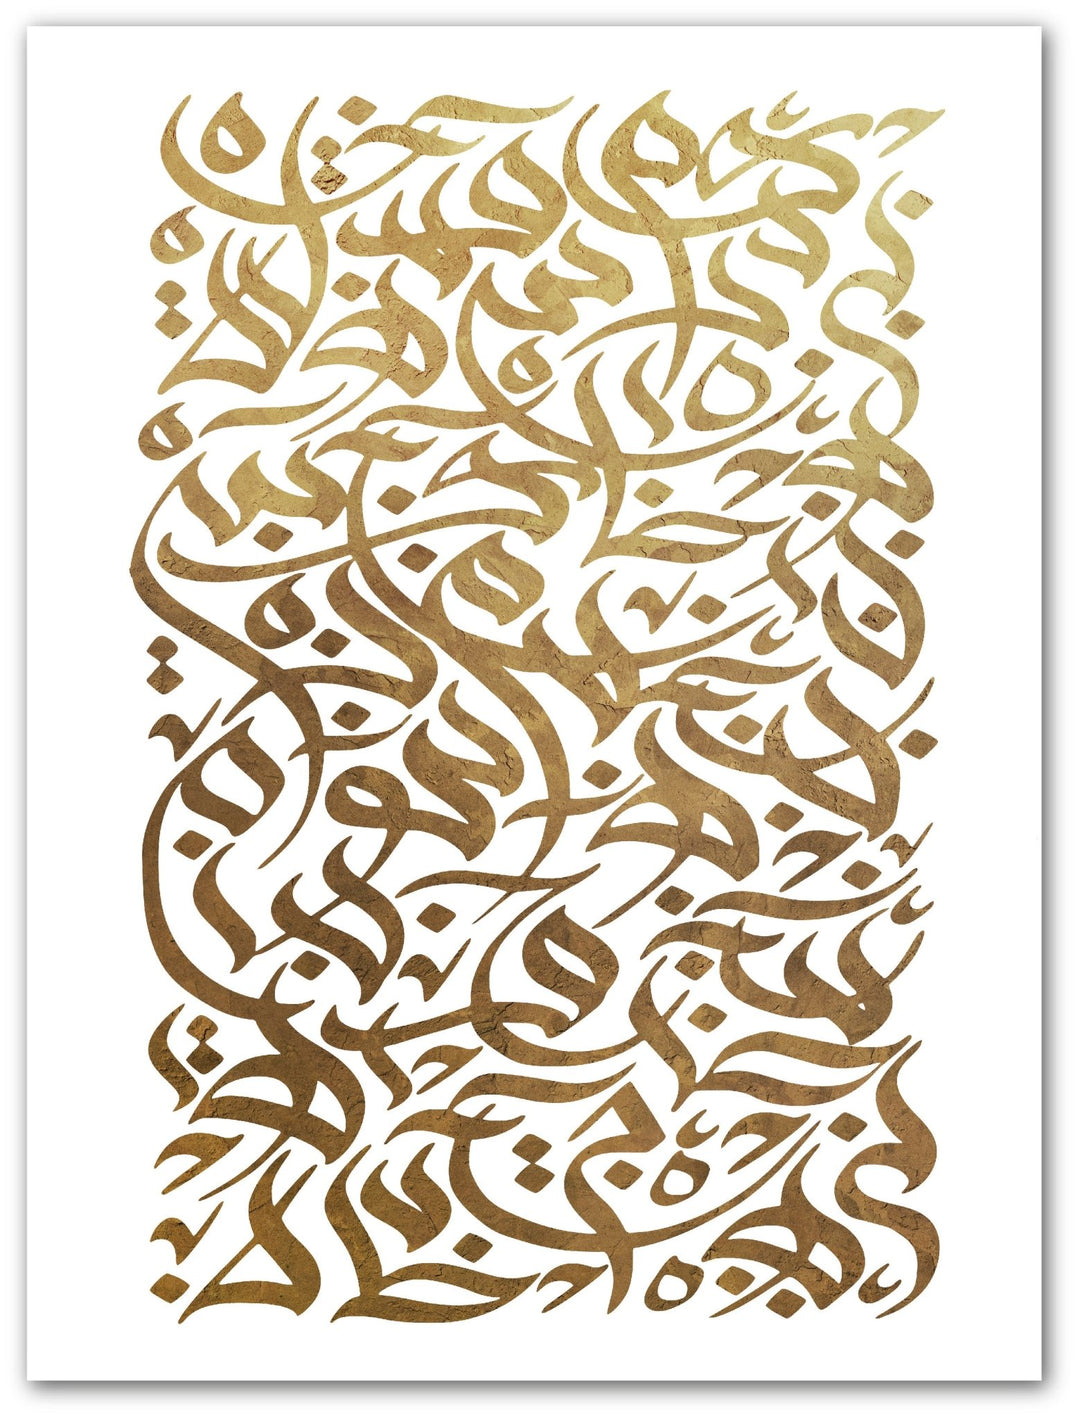 Abstract Arabic Letters - Beautiful Wall